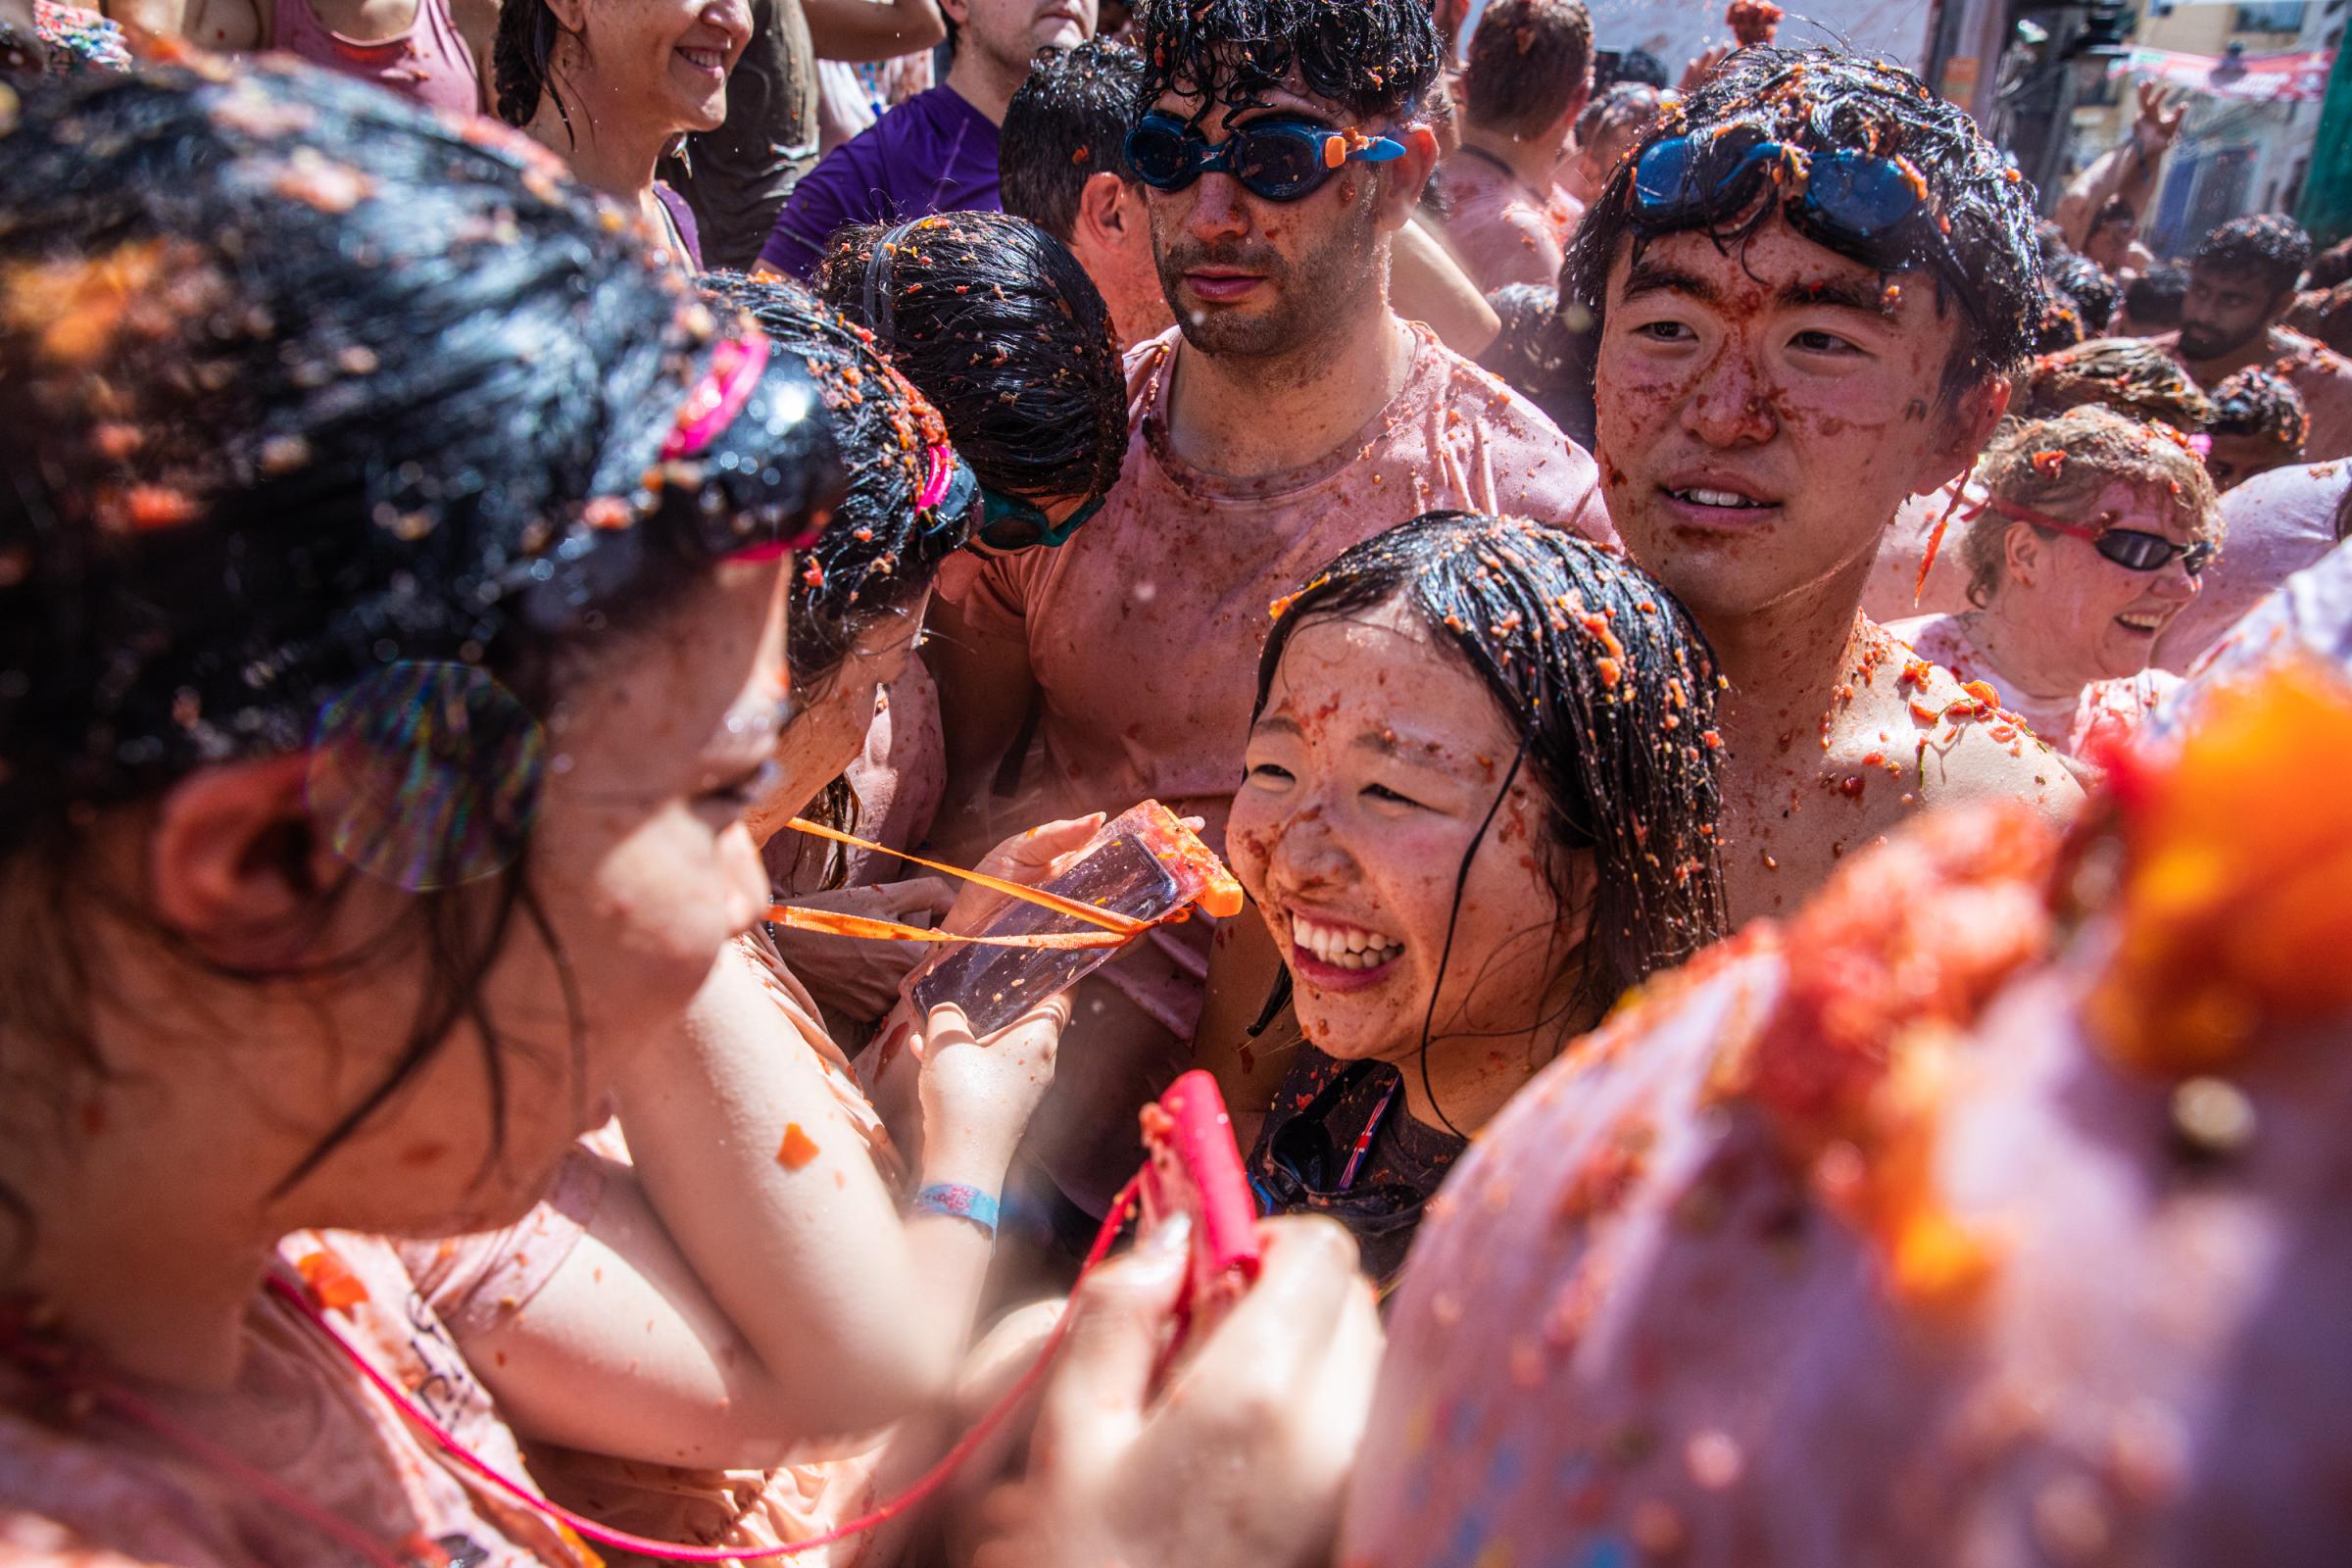 Spain's Tomato Throwing Festival Returns After Covid Hiatus For The 75th Edition - BUNOL, SPAIN - AUGUST 31: Asian revelers enjoy La...